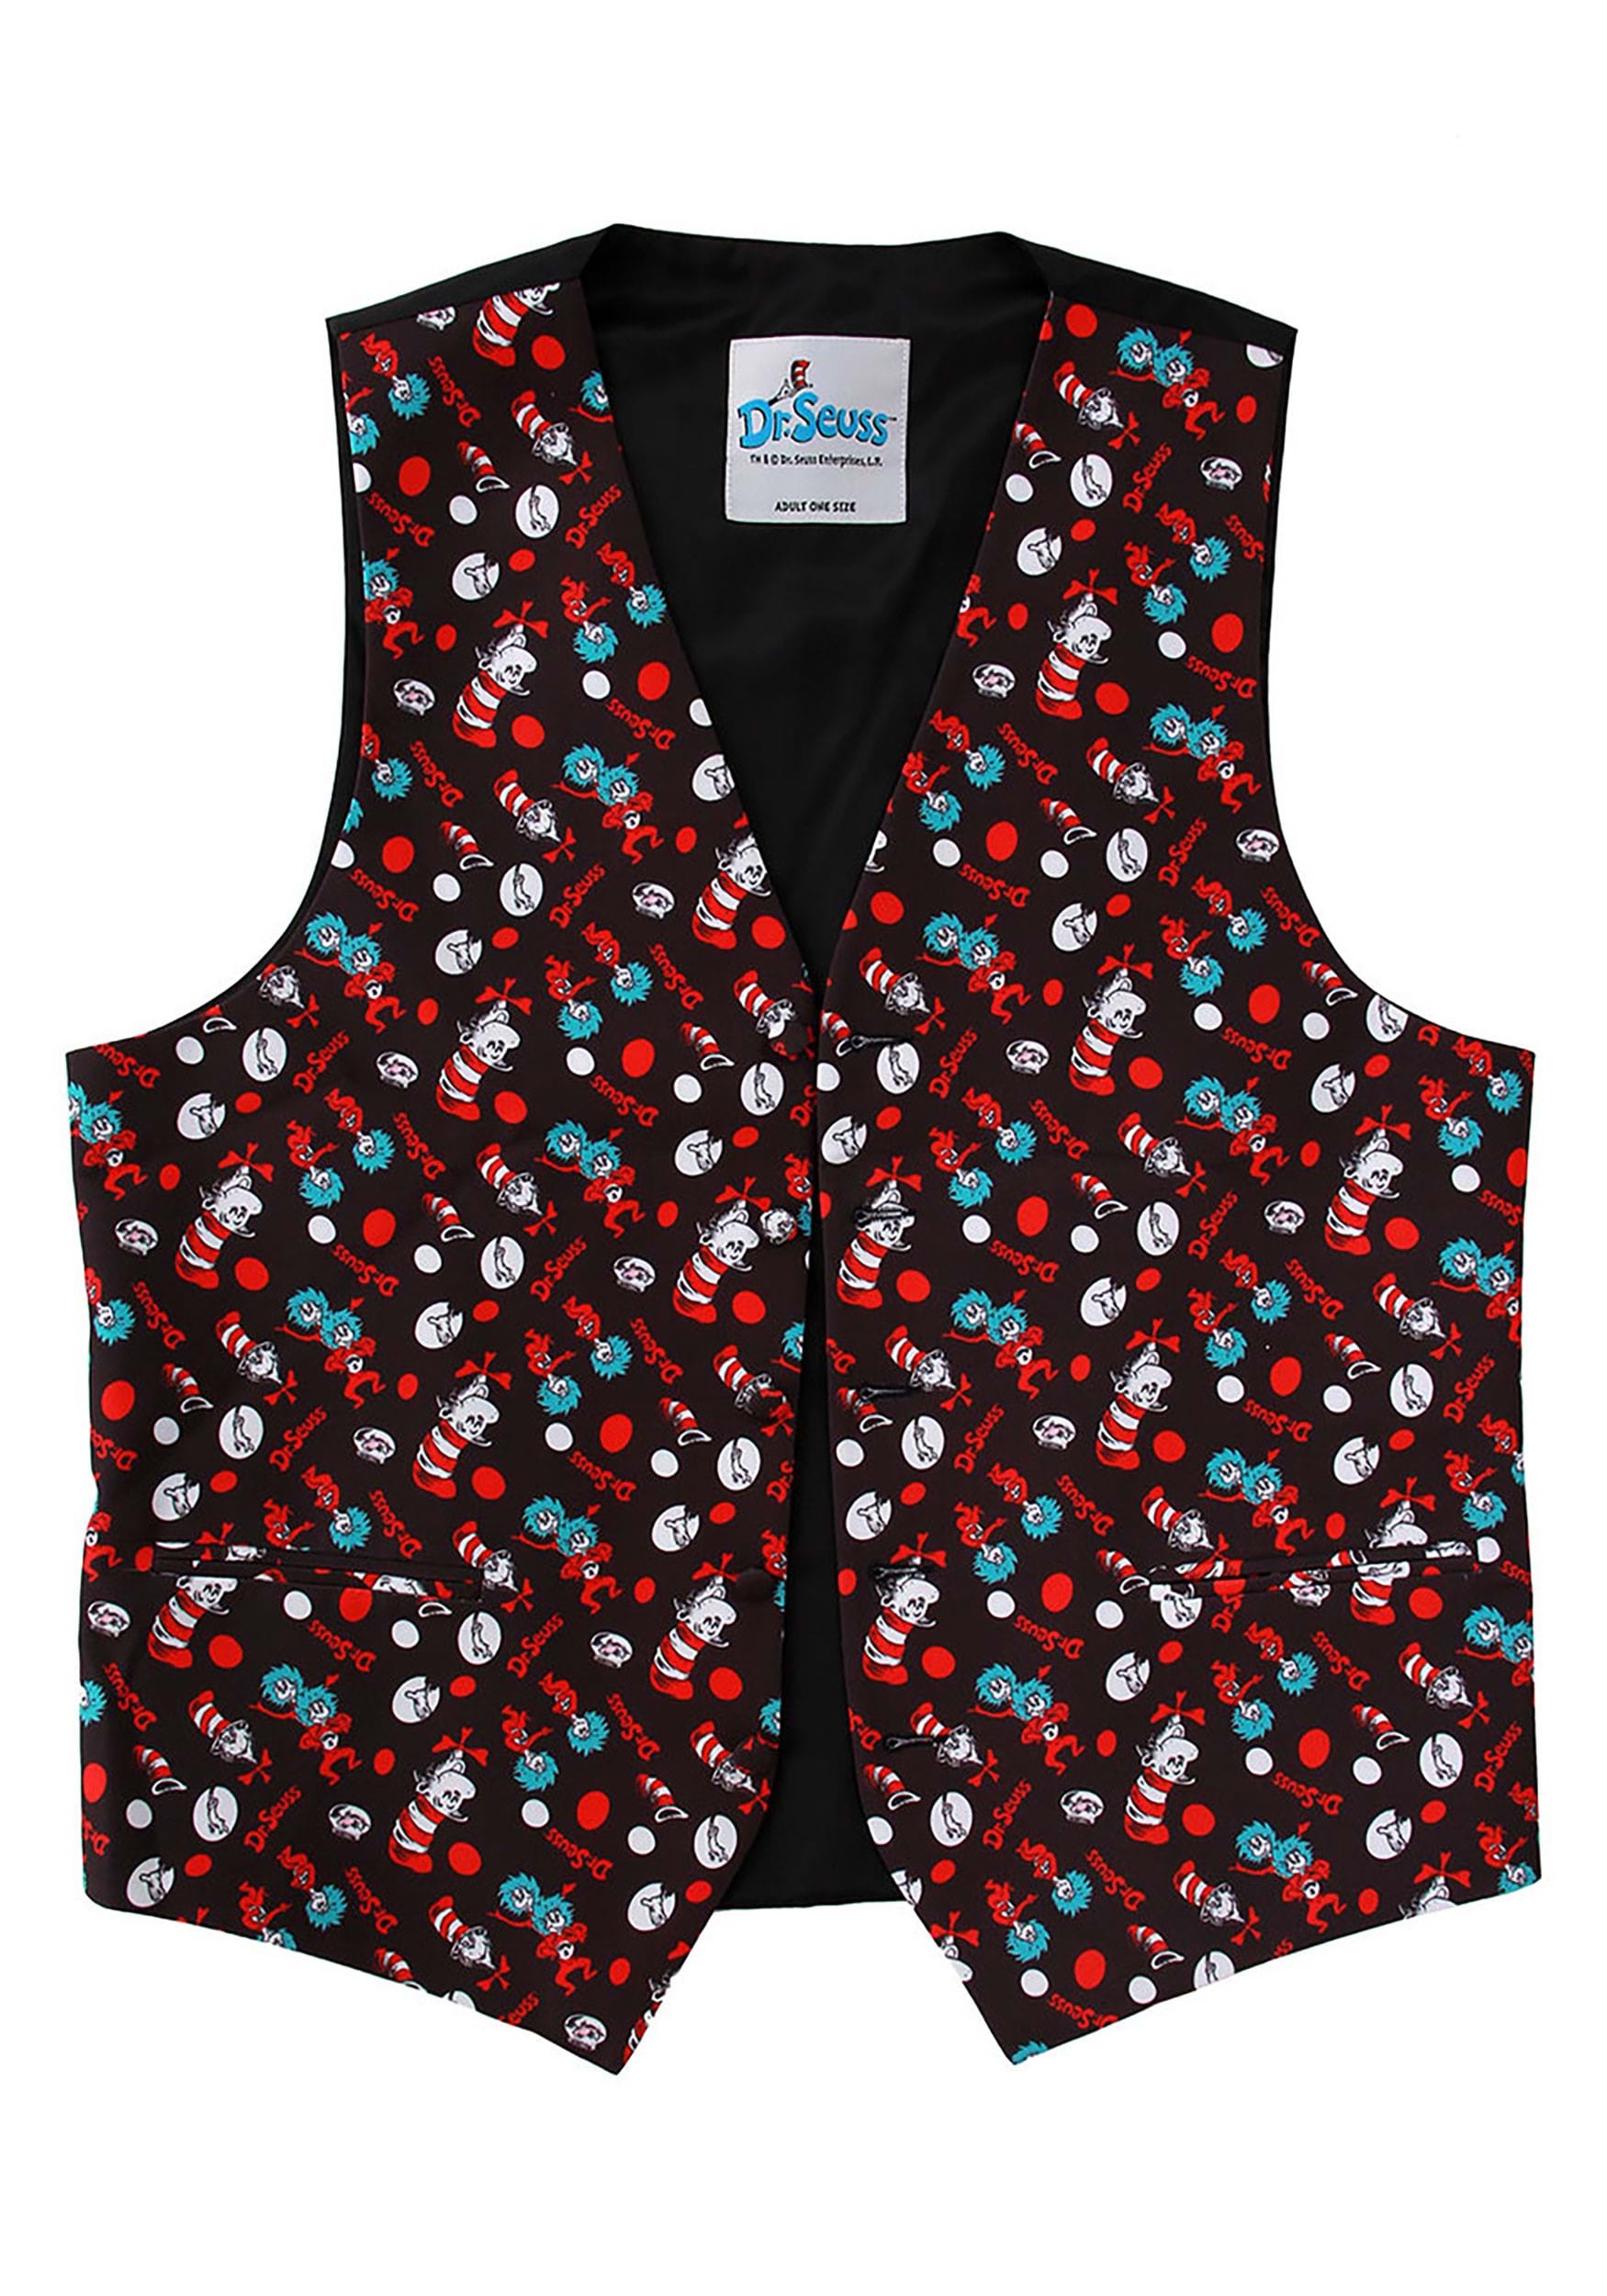 The Cat In The Hat Pattern Bow Tie & Vest Kit